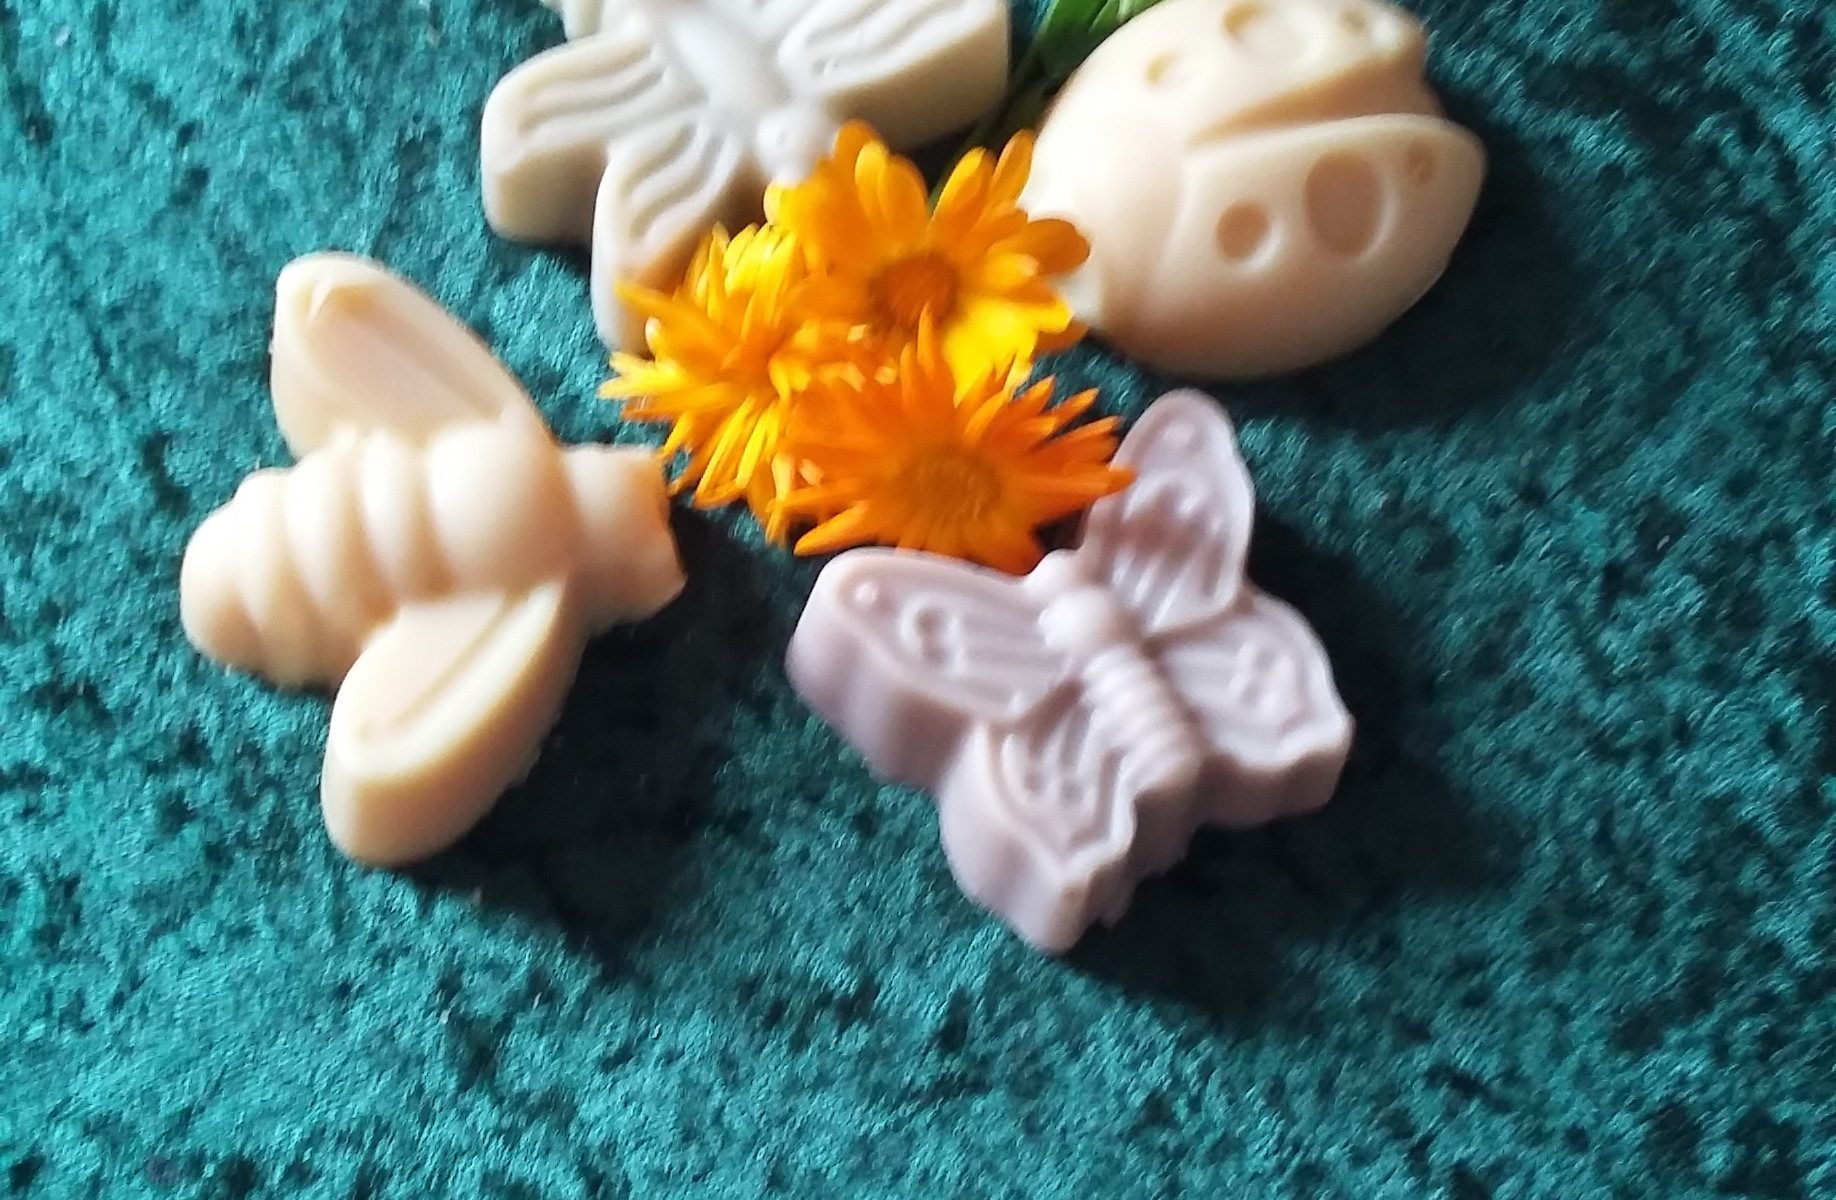 Novelty Soap - Insects & Bugs!